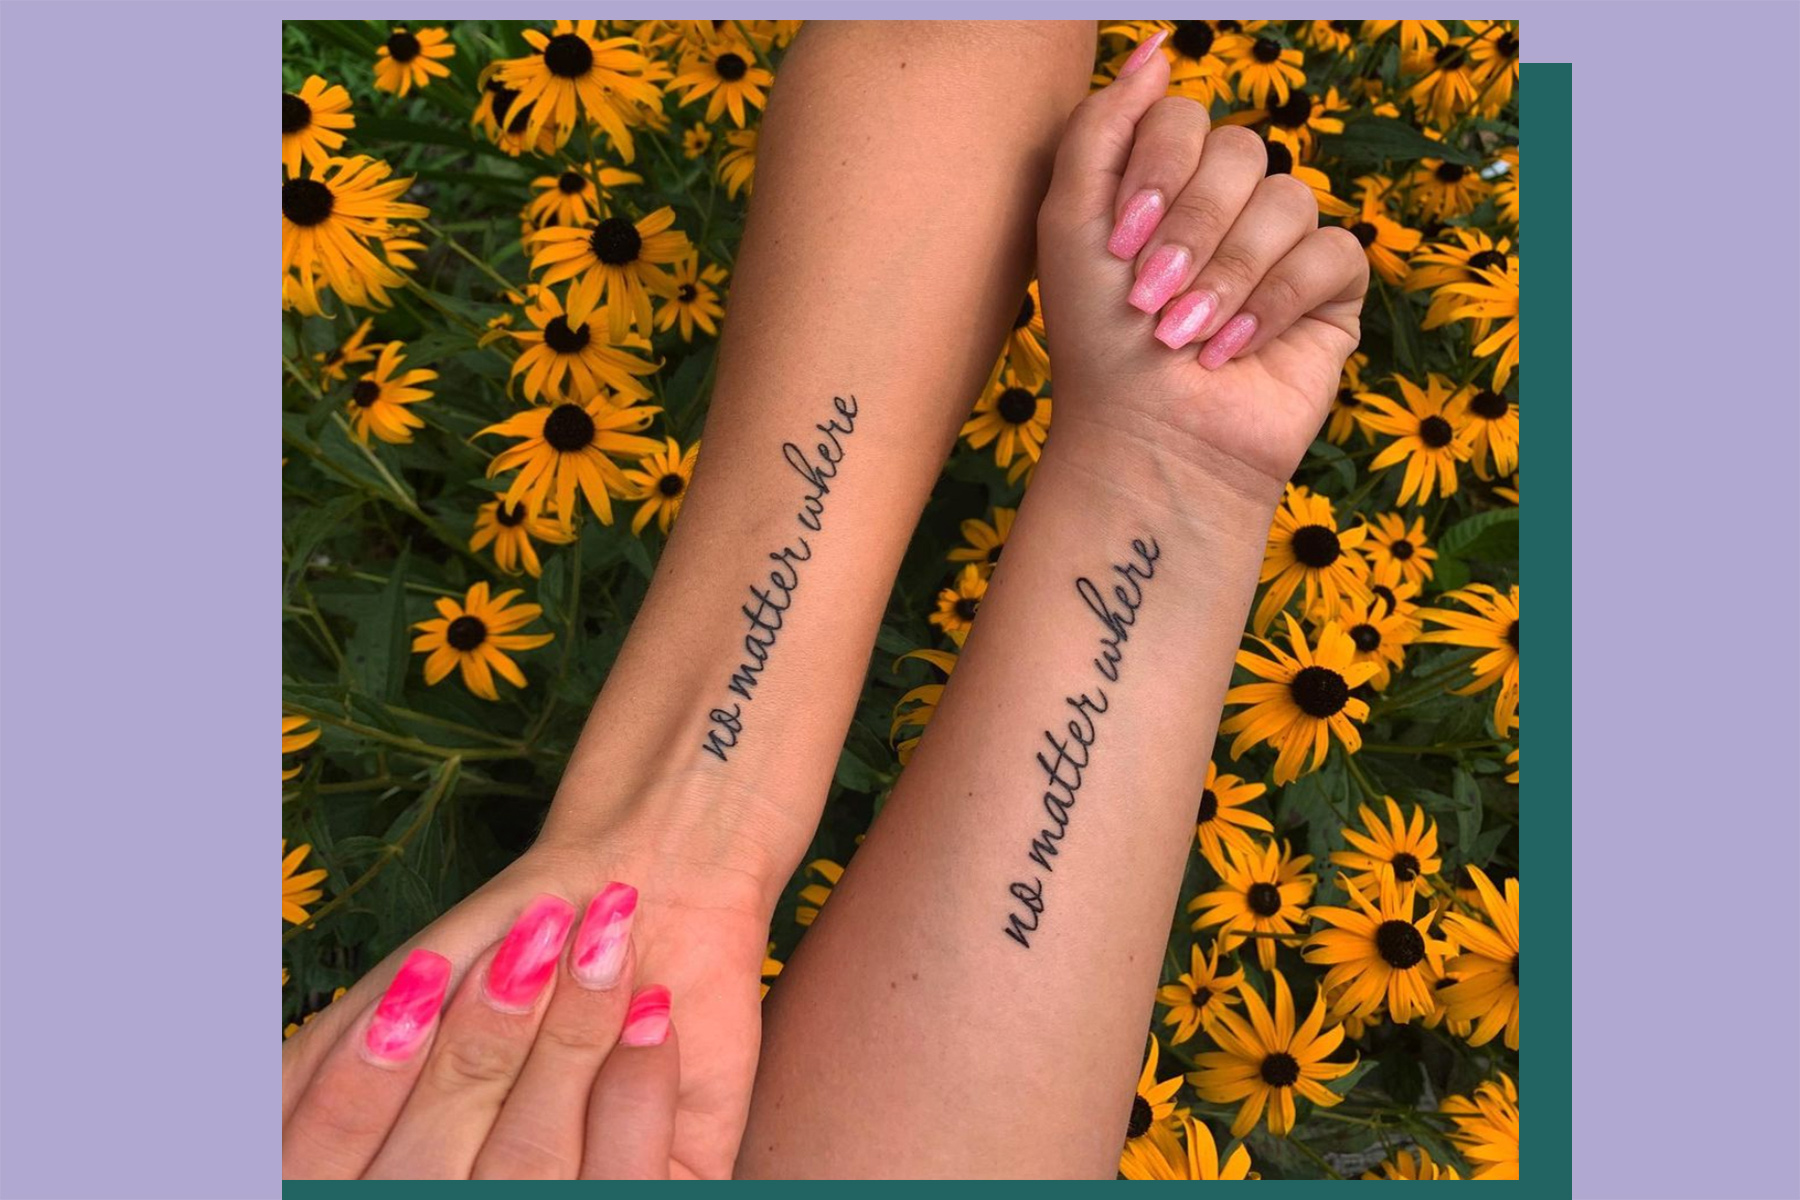 11 Best Friend Tattoo Ideas That'll Make You and Your Bestie Want to Get Inked ASAP - HelloGigglesHelloGiggles